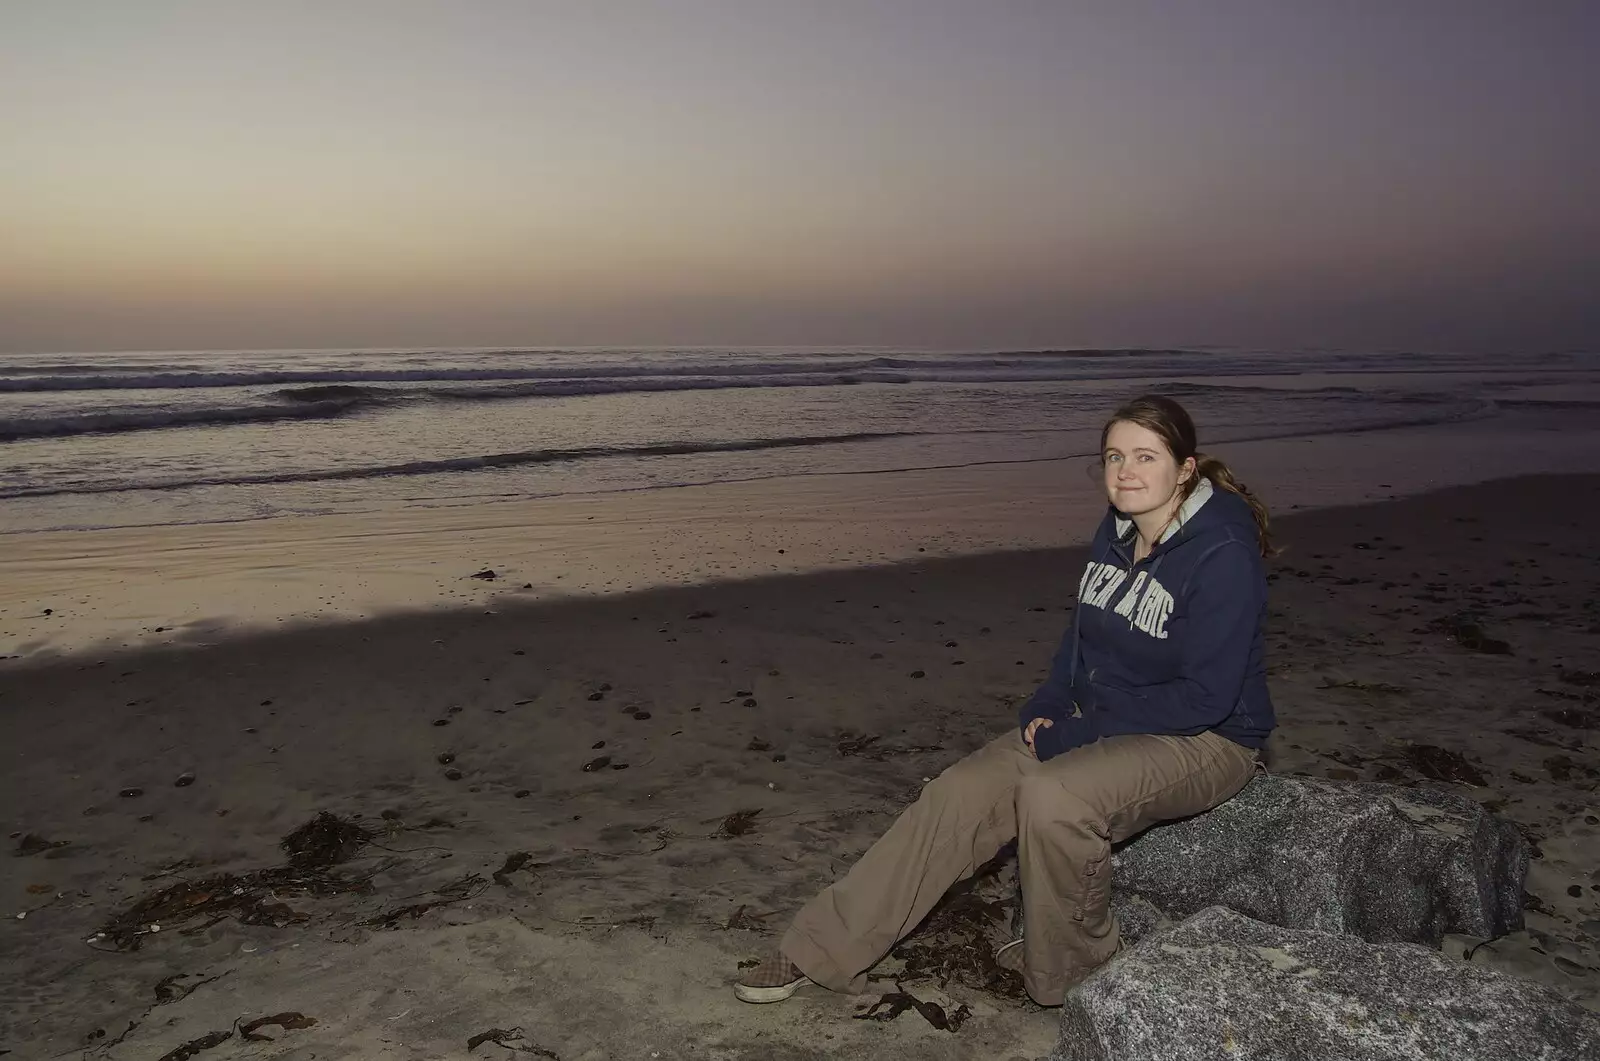 Isobel in the dusk, from San Diego 8: The Beaches of Torrey Pines, and Ramona, California, USA - 29th February 2008